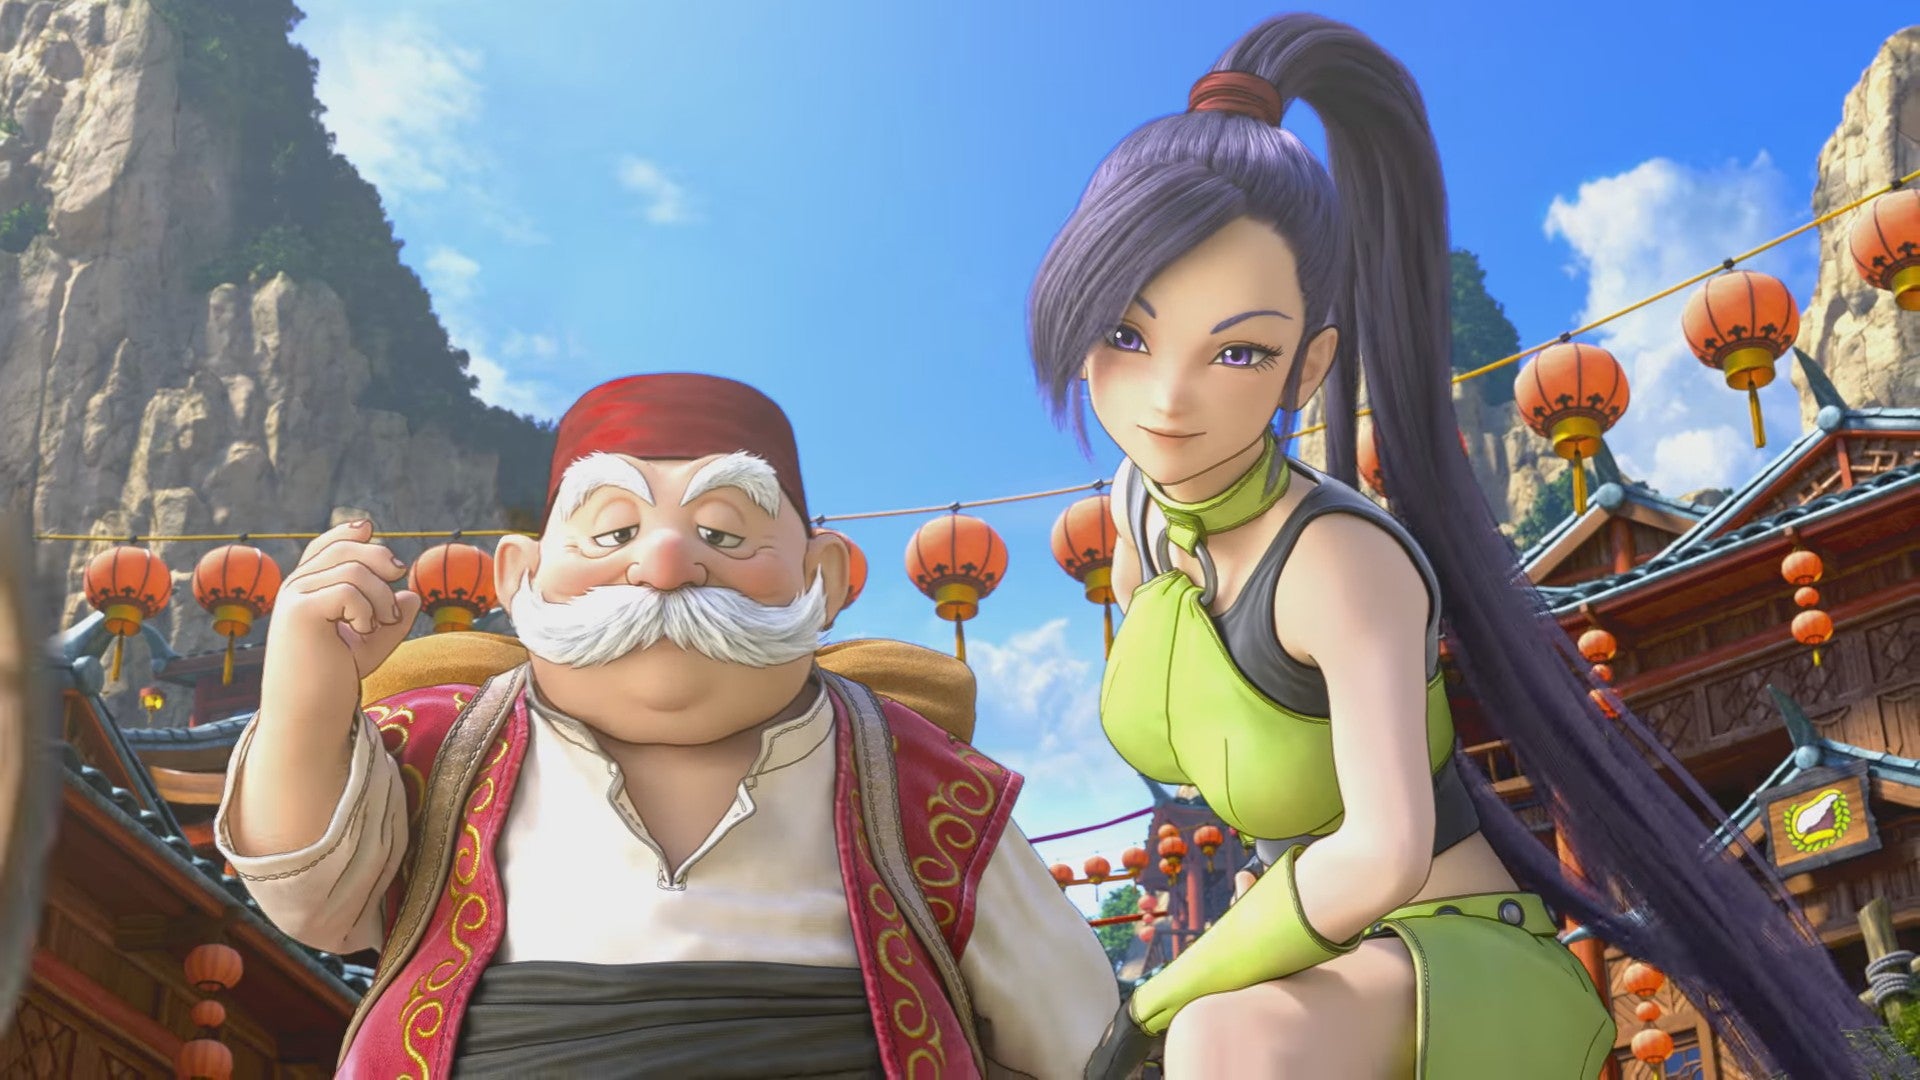 Image for Dragon Quest 11: PS4/Pro - JPRG Meets Unreal Engine 4